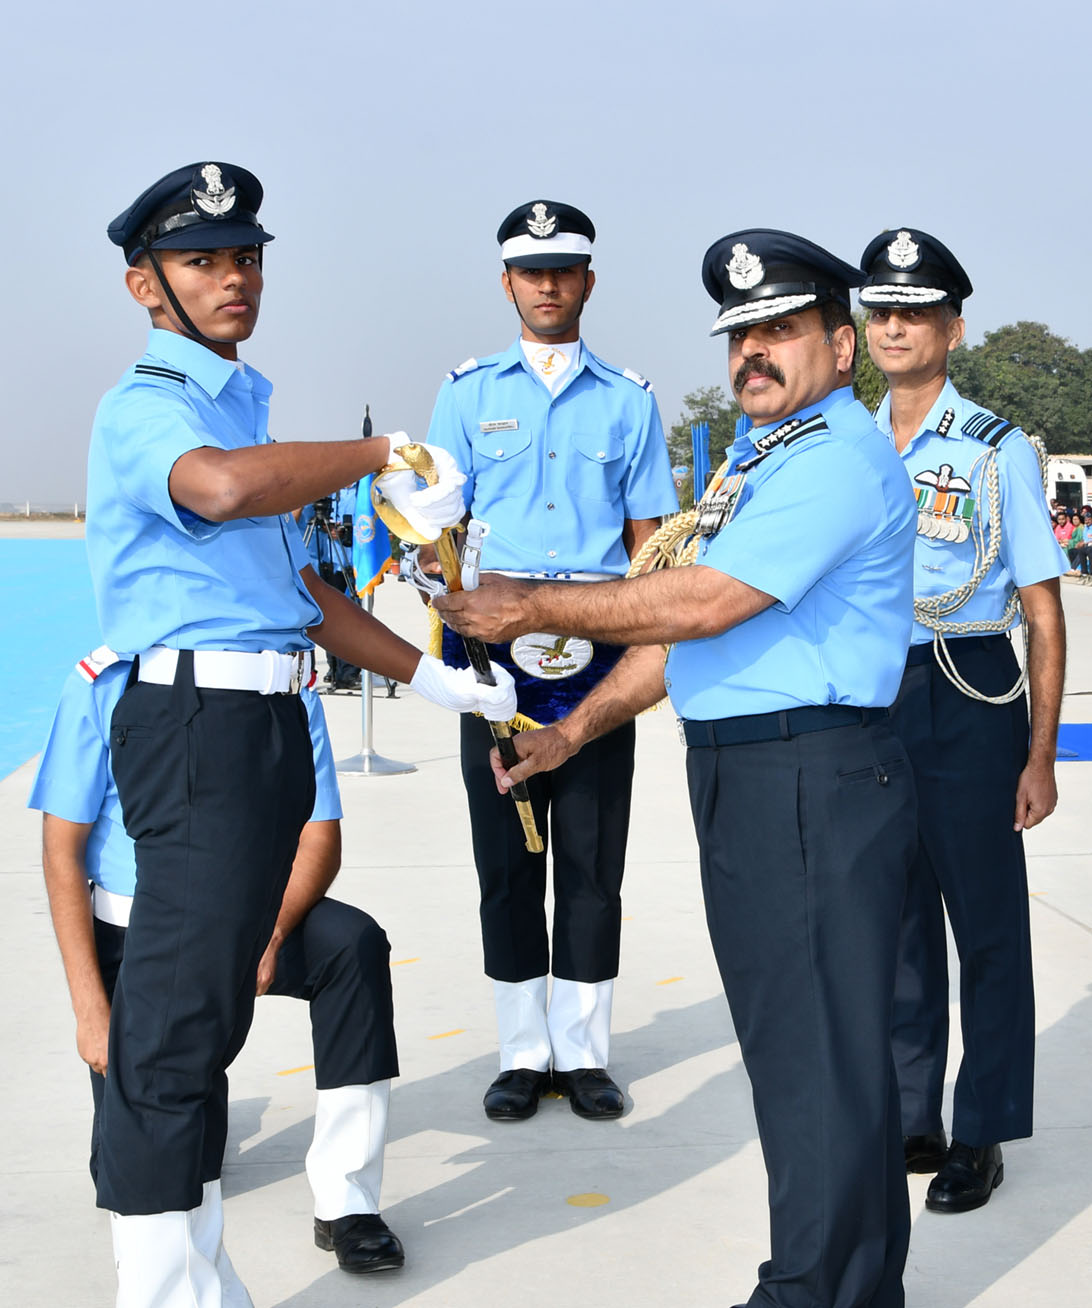 The Chief of the Air Staff, Air Chief Marshal R.K.S. Bhadauria Staff presenting the sword of honour to Flying Officer Arunabha Chakraborty form the flying branch for standing first in overall merit in the Pilots course, during the Combined Graduation Parade at Air Force Academy, Dundigal, in Hyderabad on December 21, 2019.